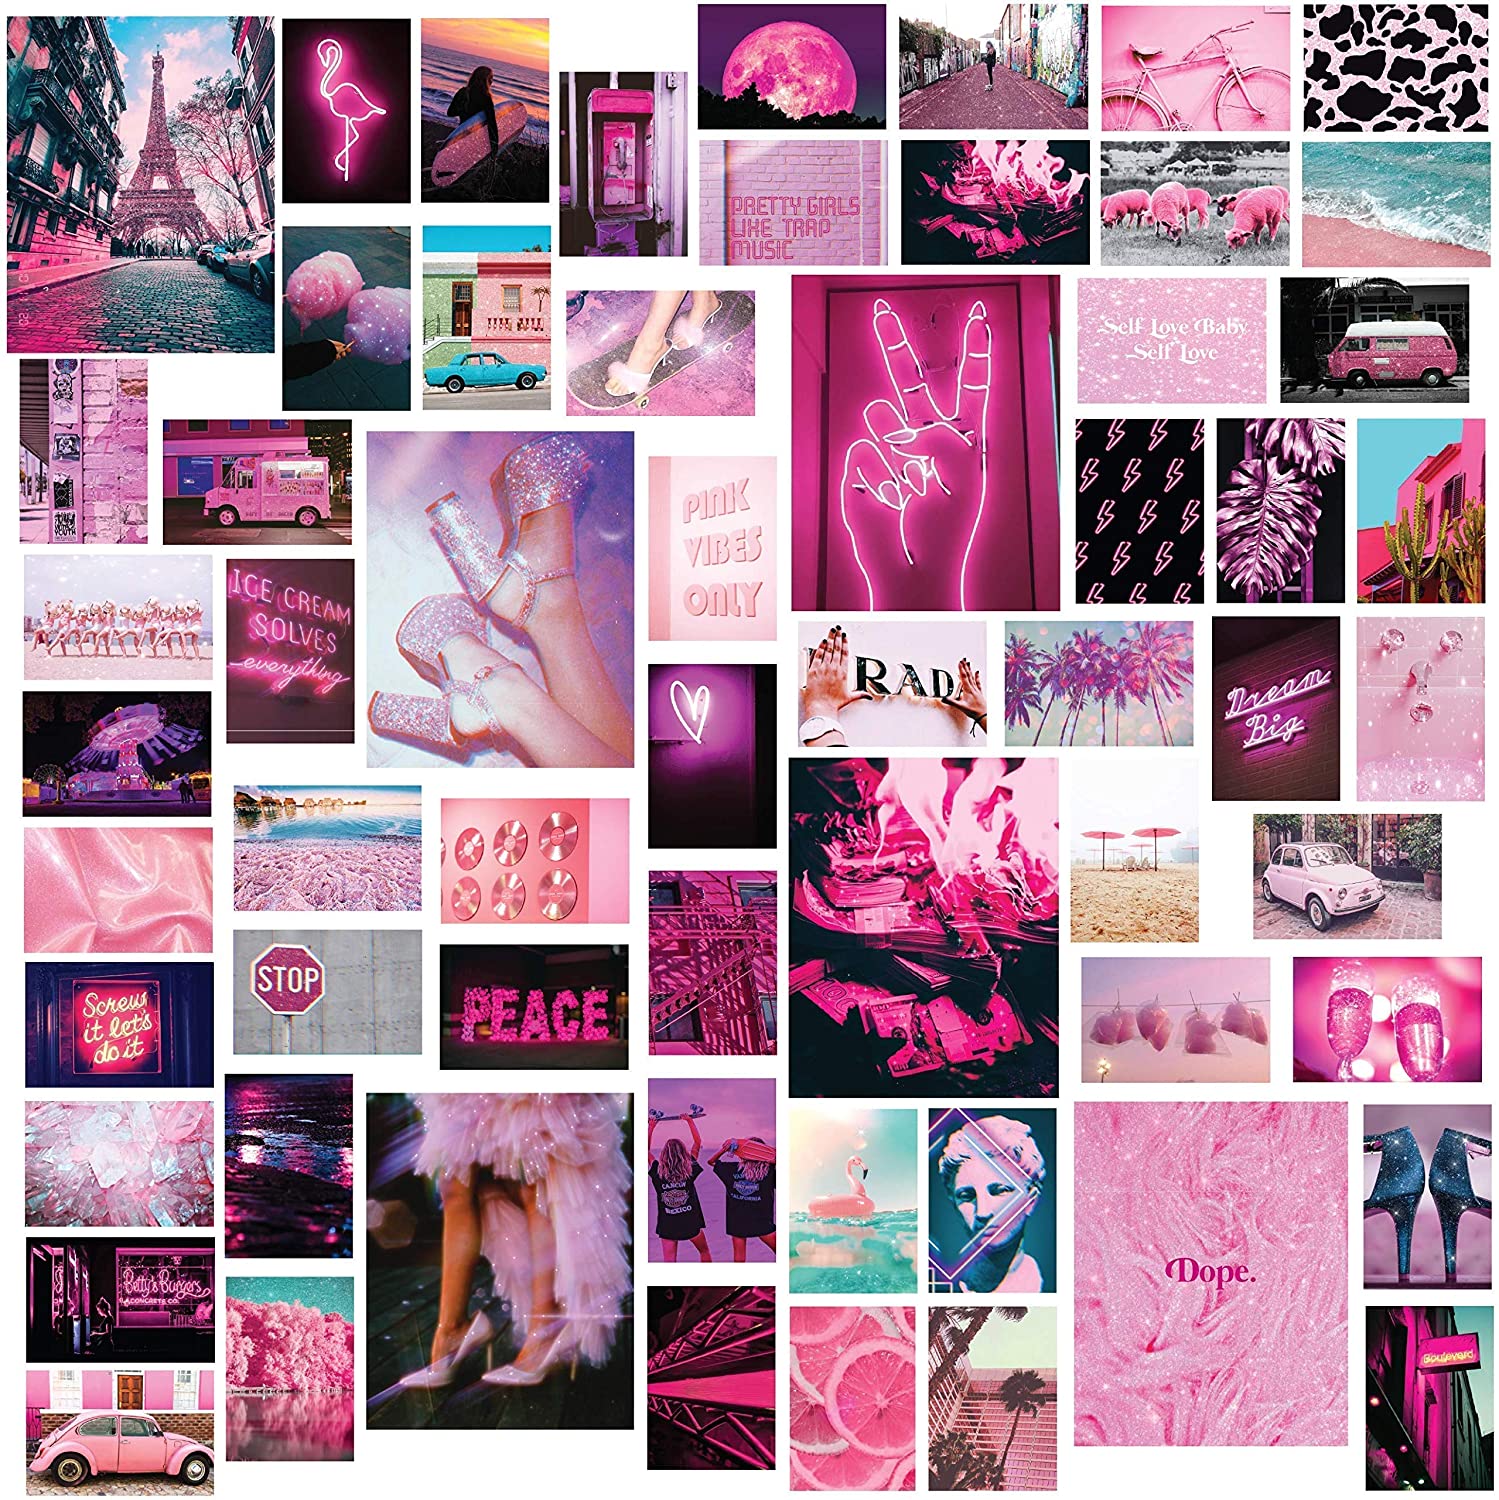 Room Decor for Teen Girls Aesthetic Pink Wall Collage Kit 15 Square Feet 6 Posters and 54 4x6 Inch Image for Room Aesthetic Girl Room Decor, Handmade Products